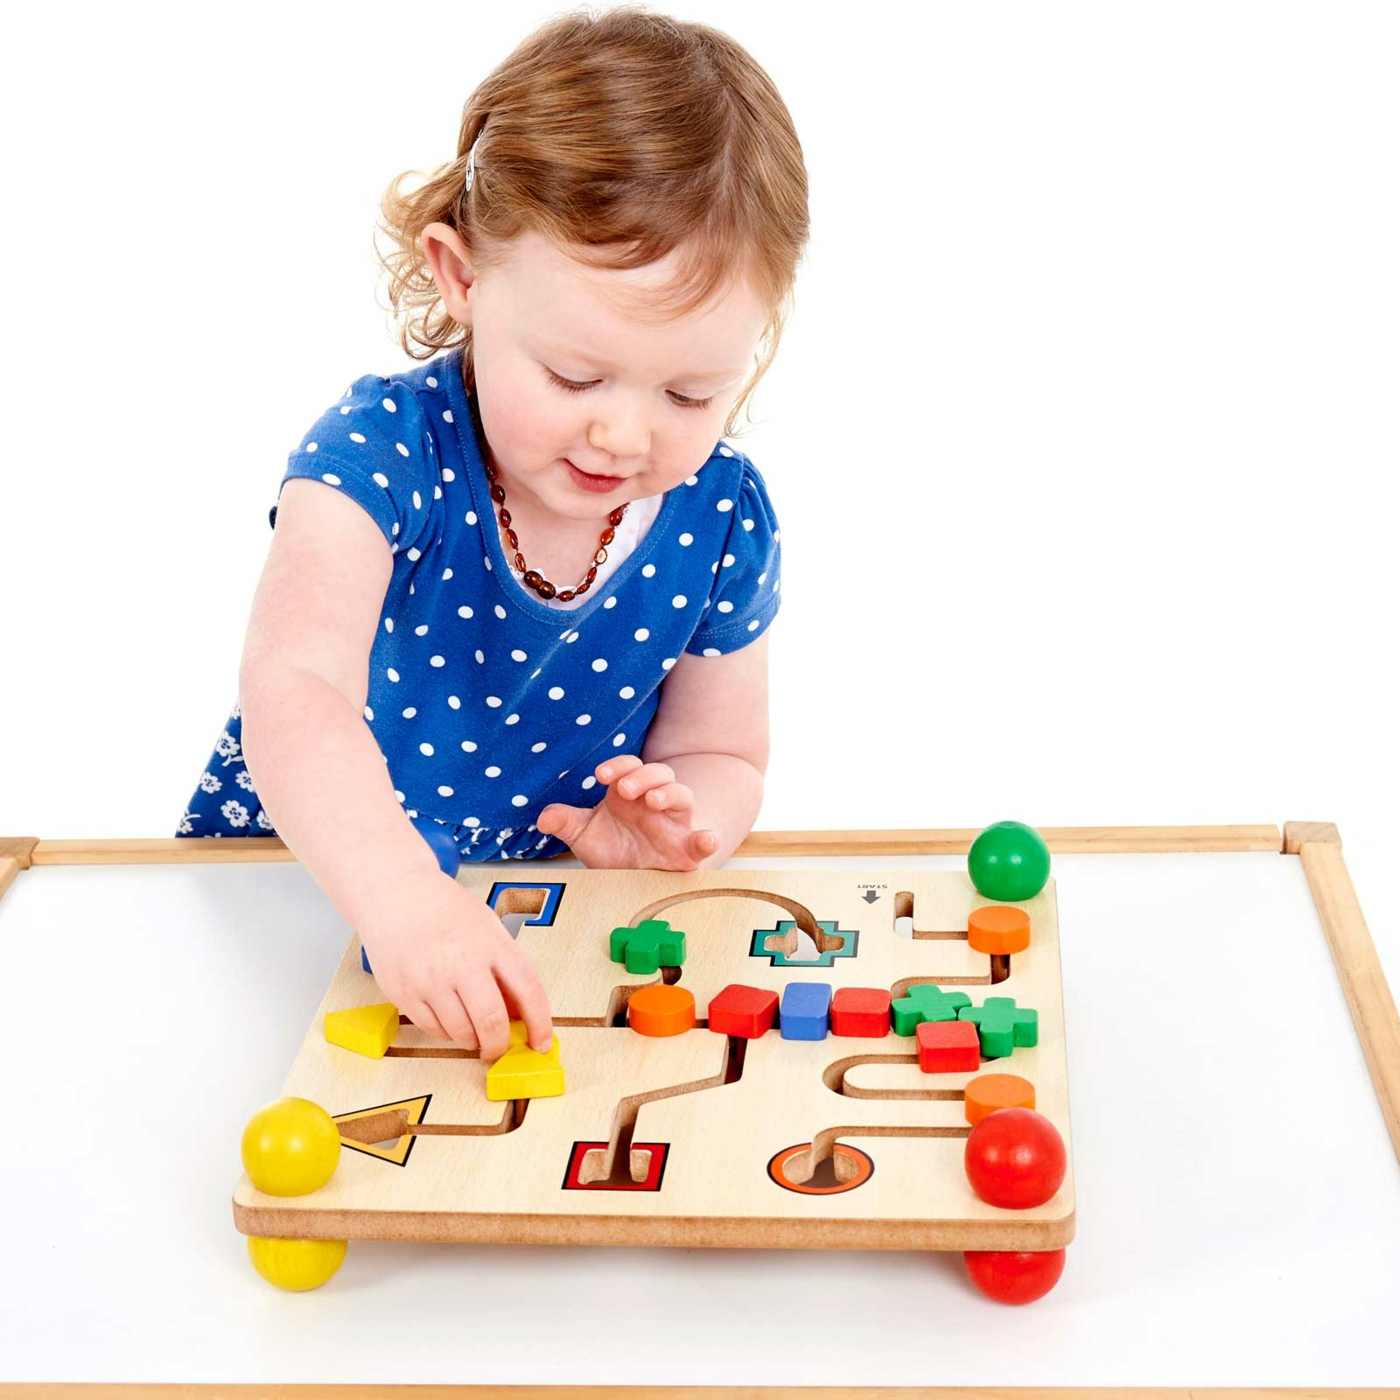 Wooden toy, which Motorik promotes, is a great idea for giving to small children